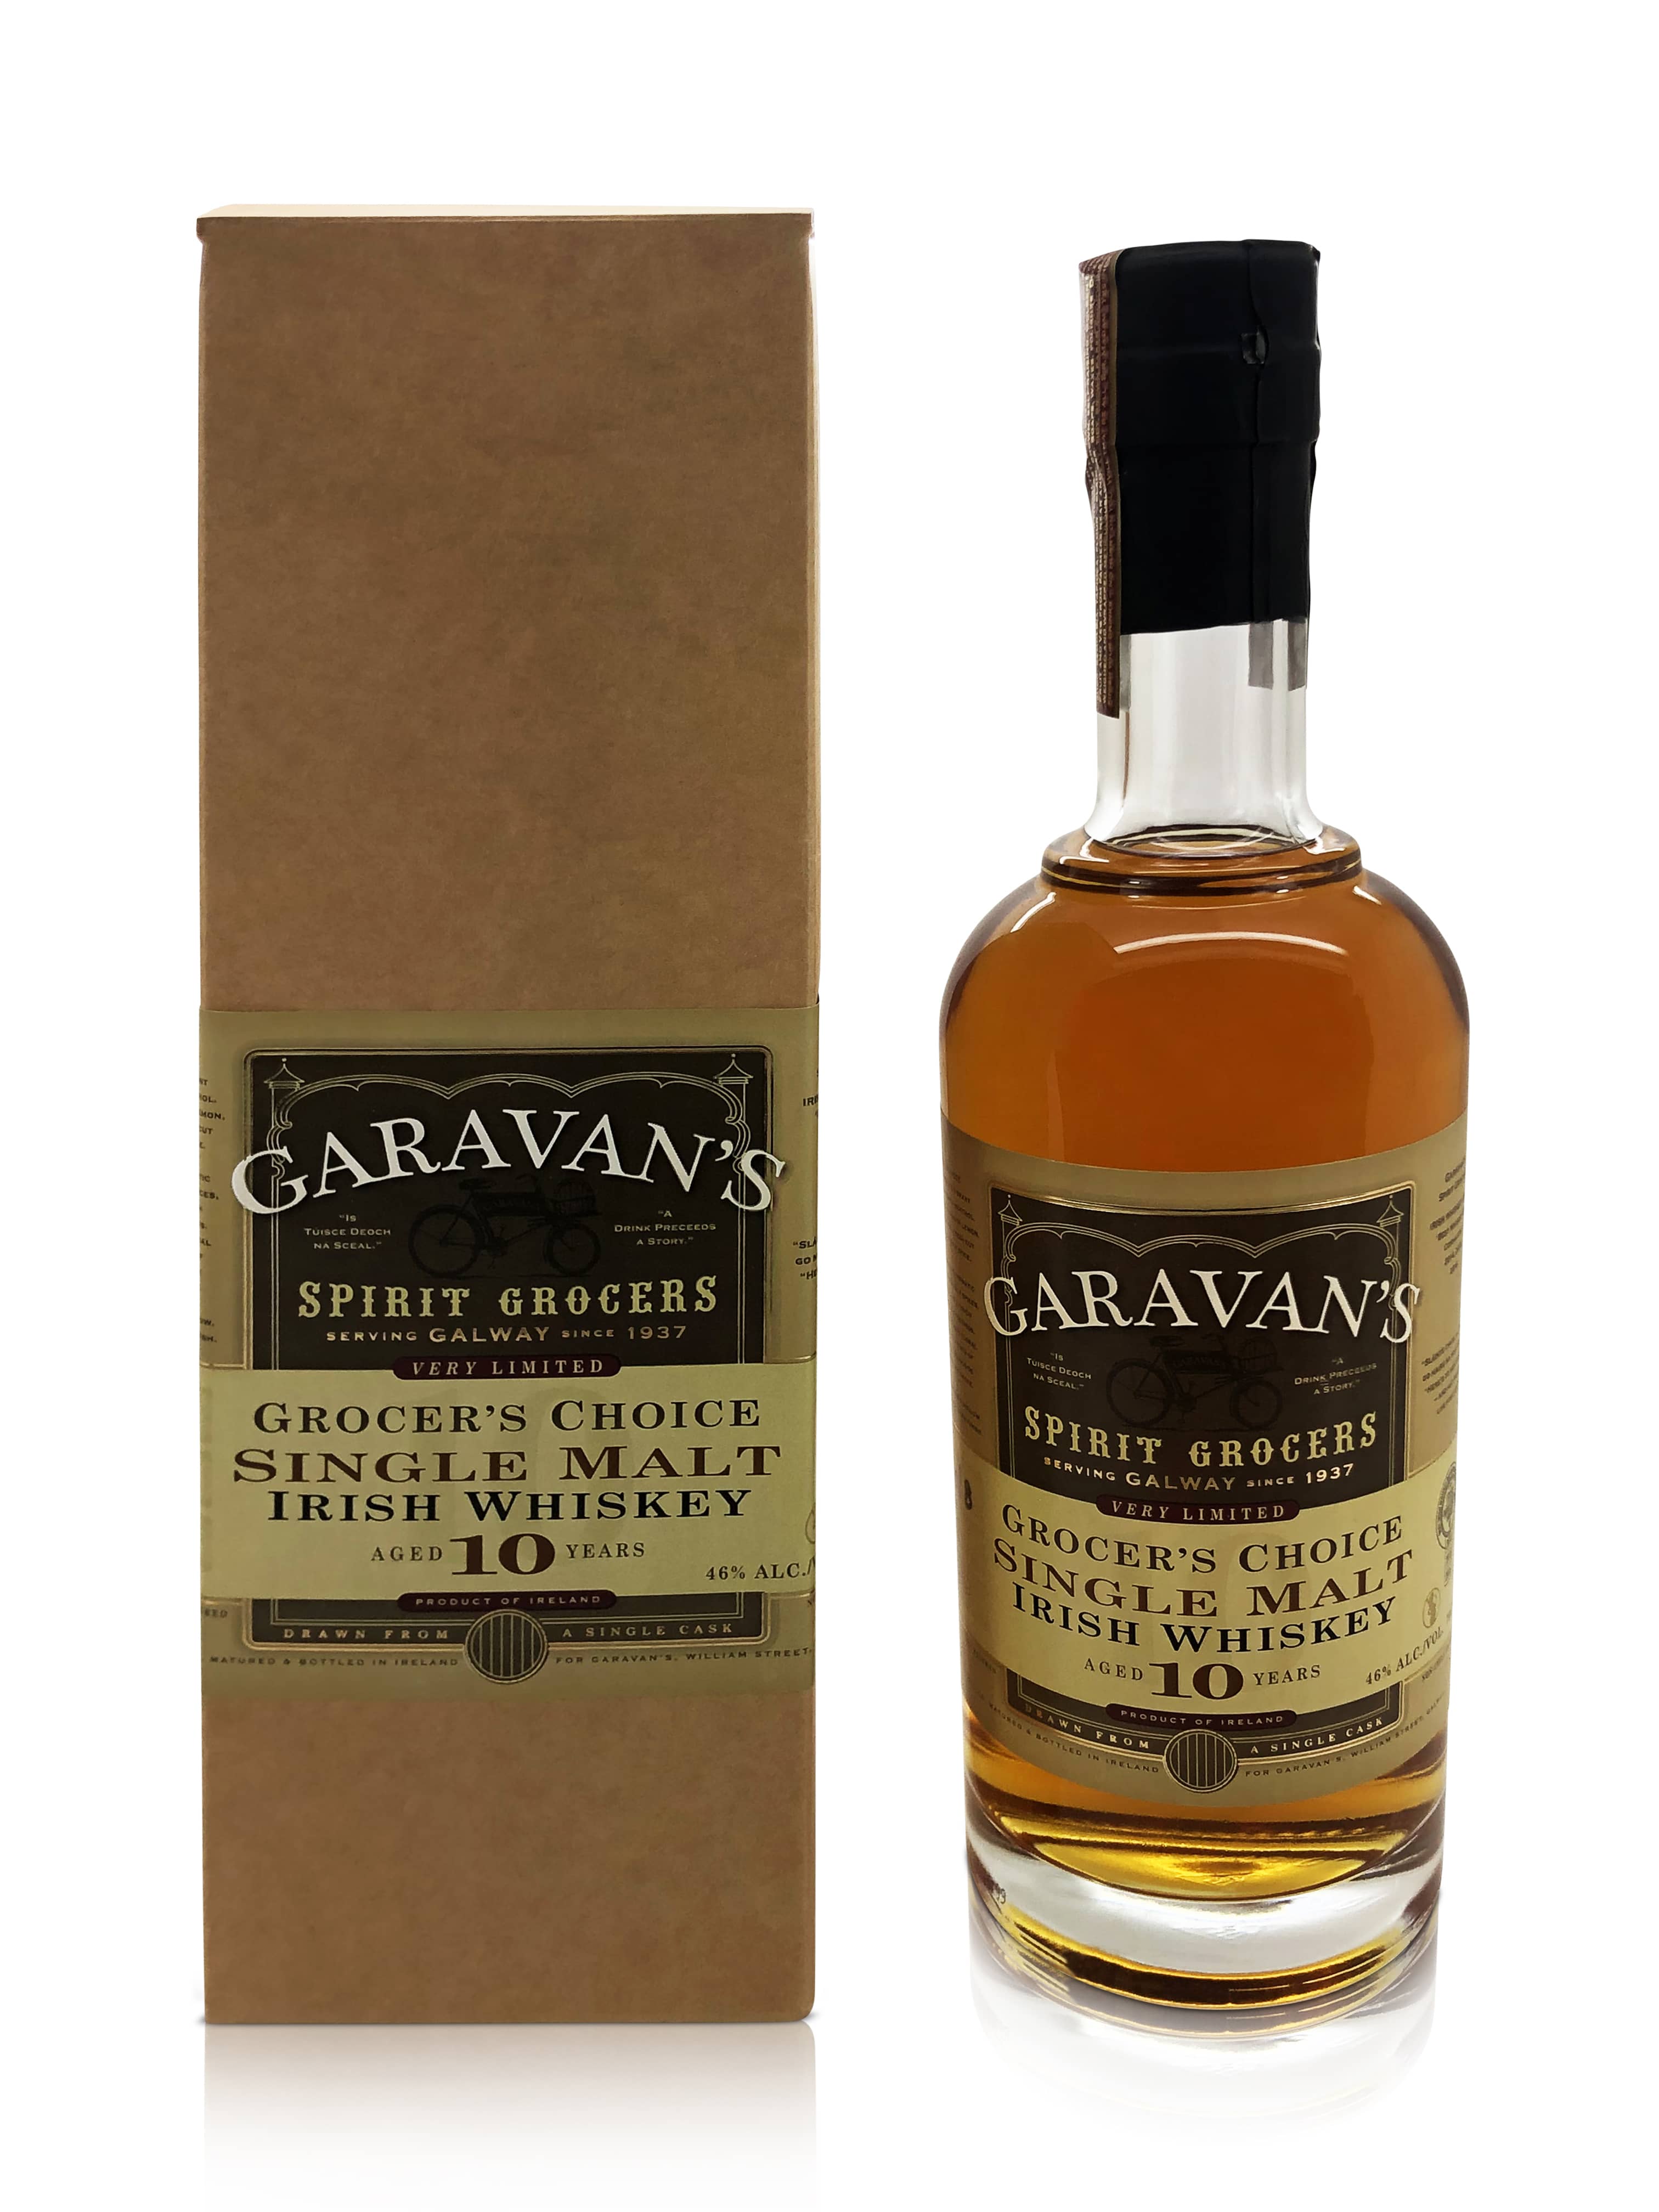 Garavan's Bar Grocers Choice Single Malt Irish Whiskey - Limited Edition 10-Year-Old - Rich Aromas and Spices - Individually Numbered and Hand-Signed Bottles